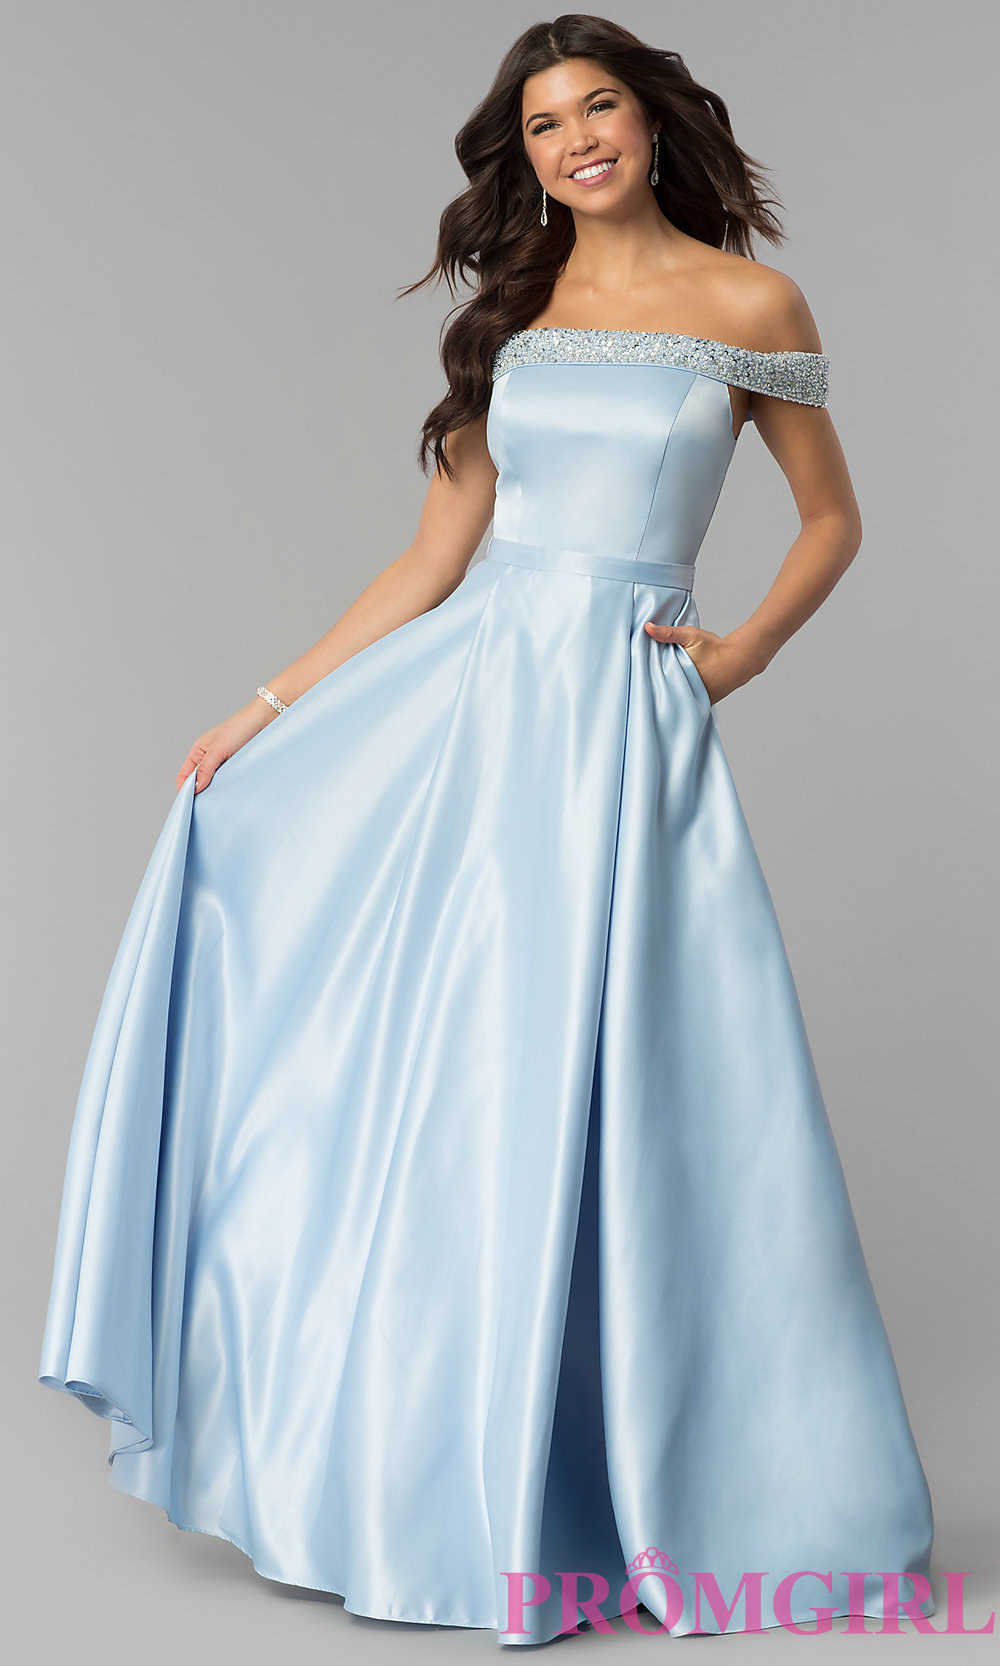 The Best Places To Buy Prom Dresses Online